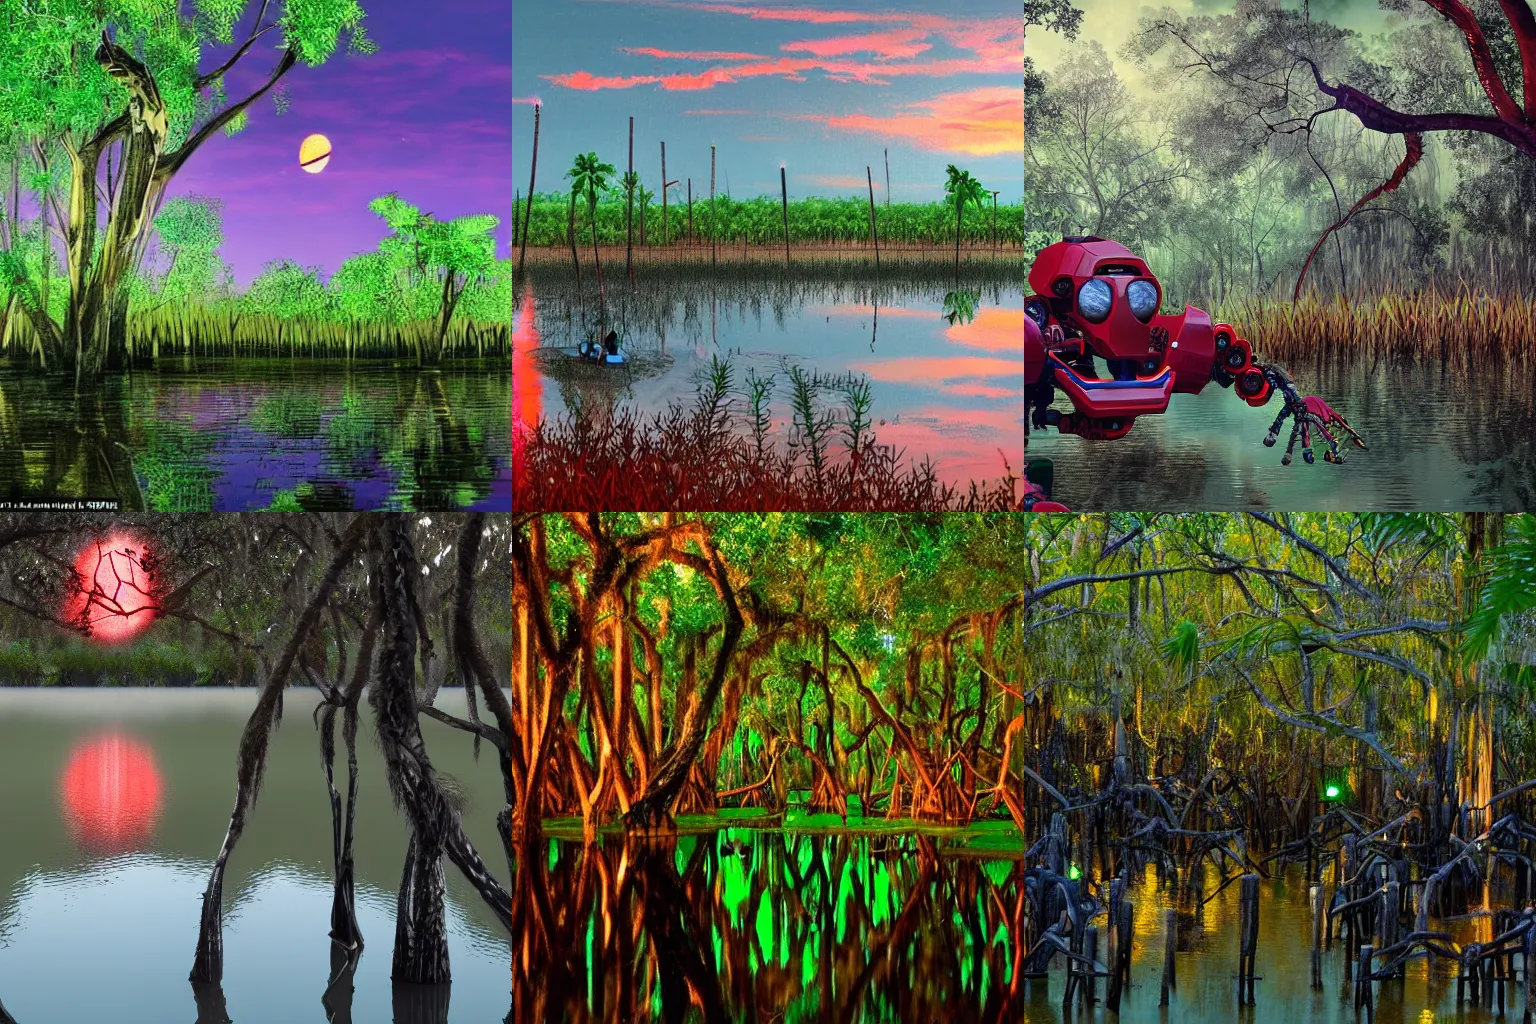 Prompt: florida swamp, mangrove trees, late sunset, photorealistic, mecha robots with glowing red lights, robots looking for escaped prisoners